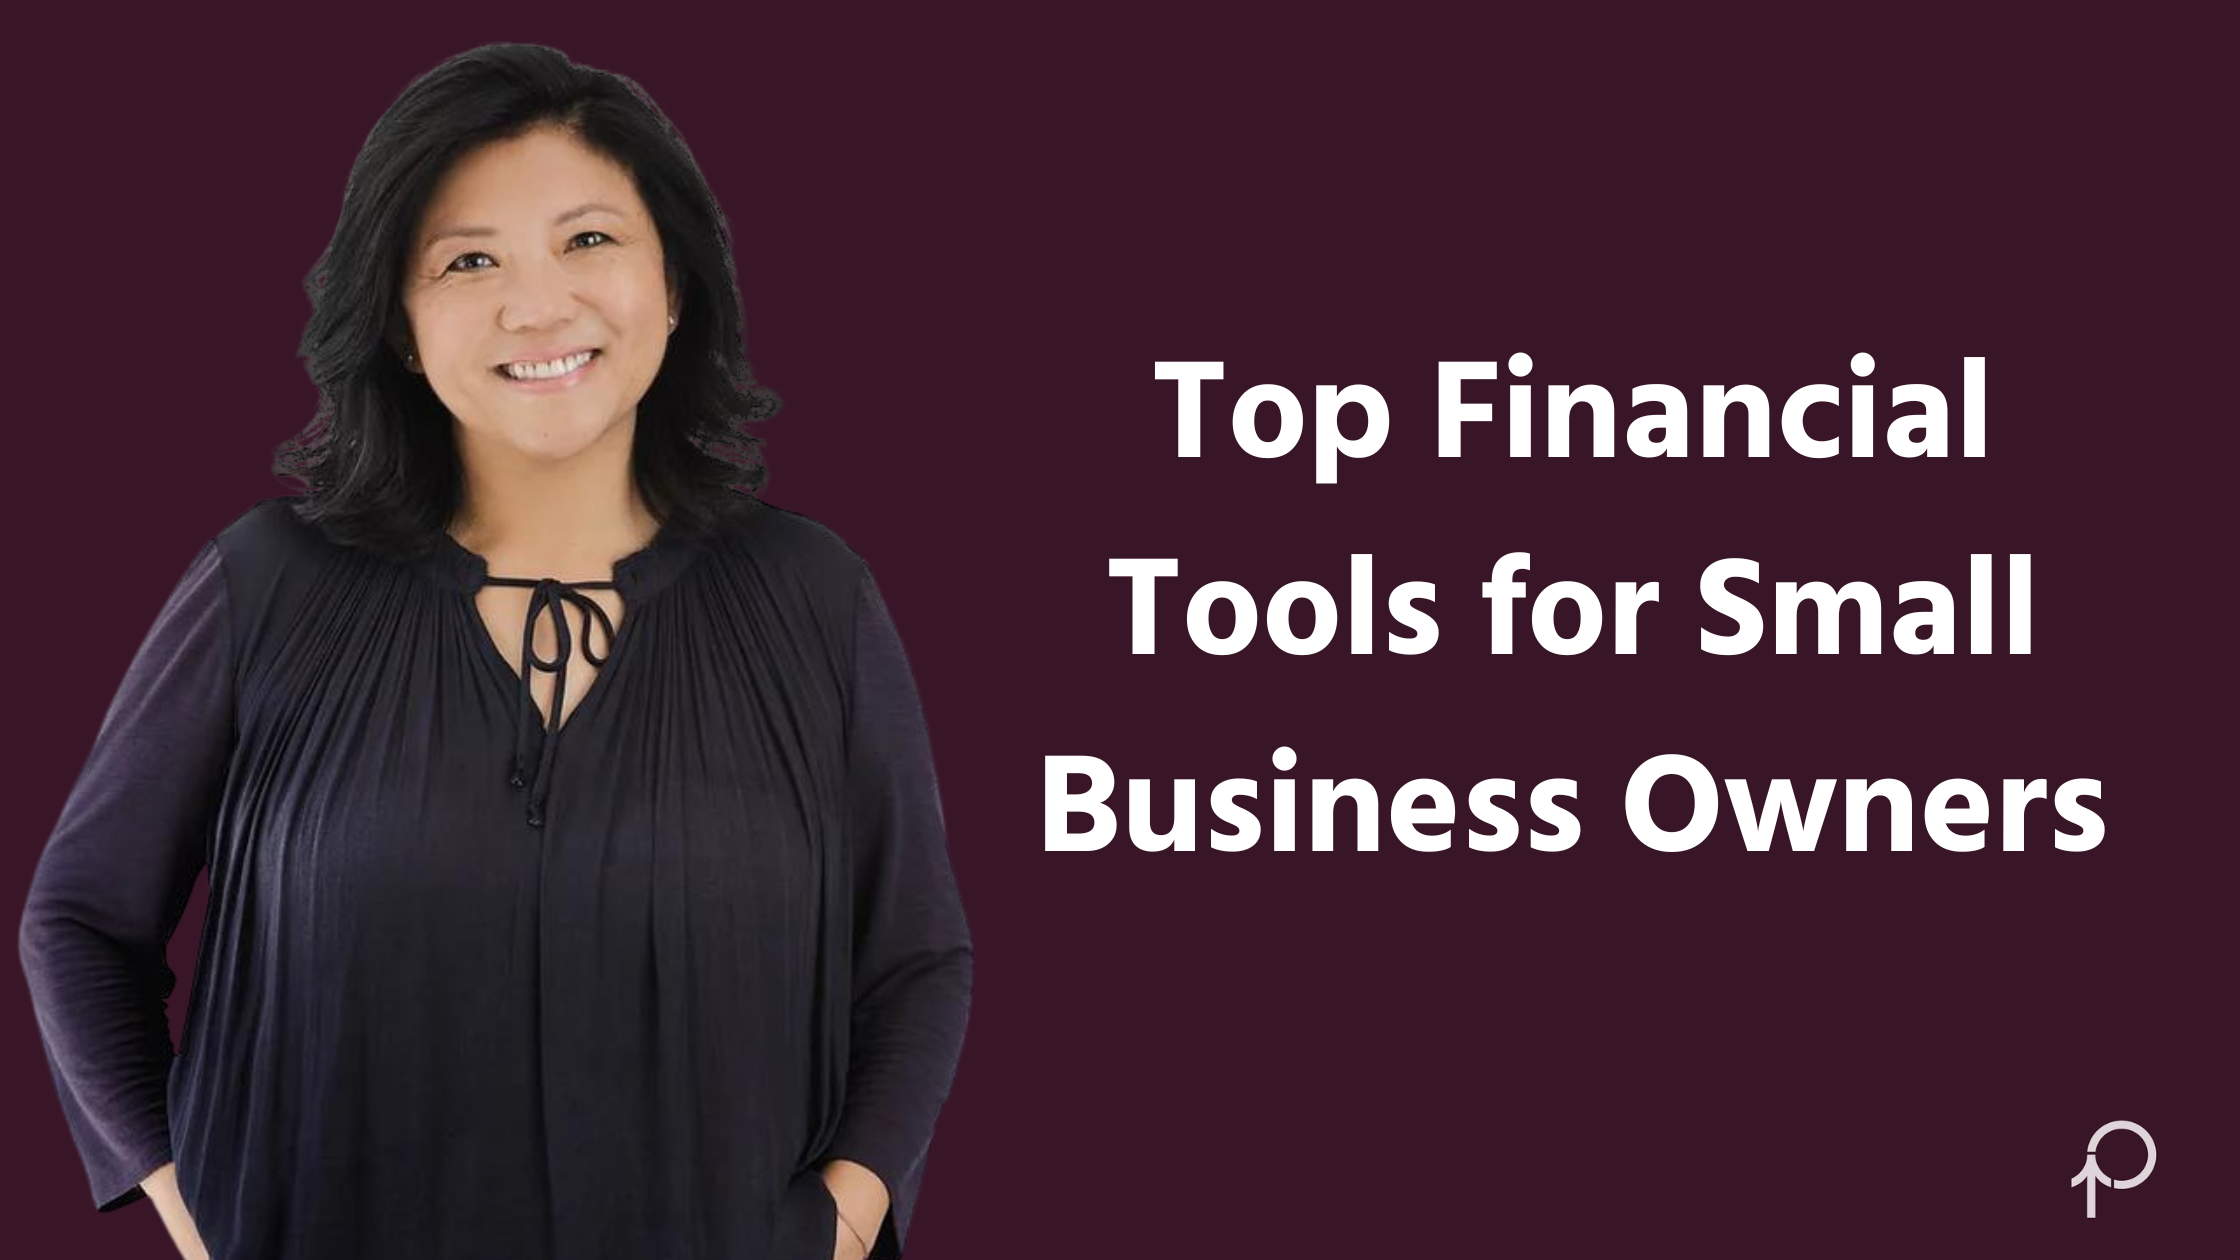 Jean's Top 5 Financial Tools for Small Business Owners